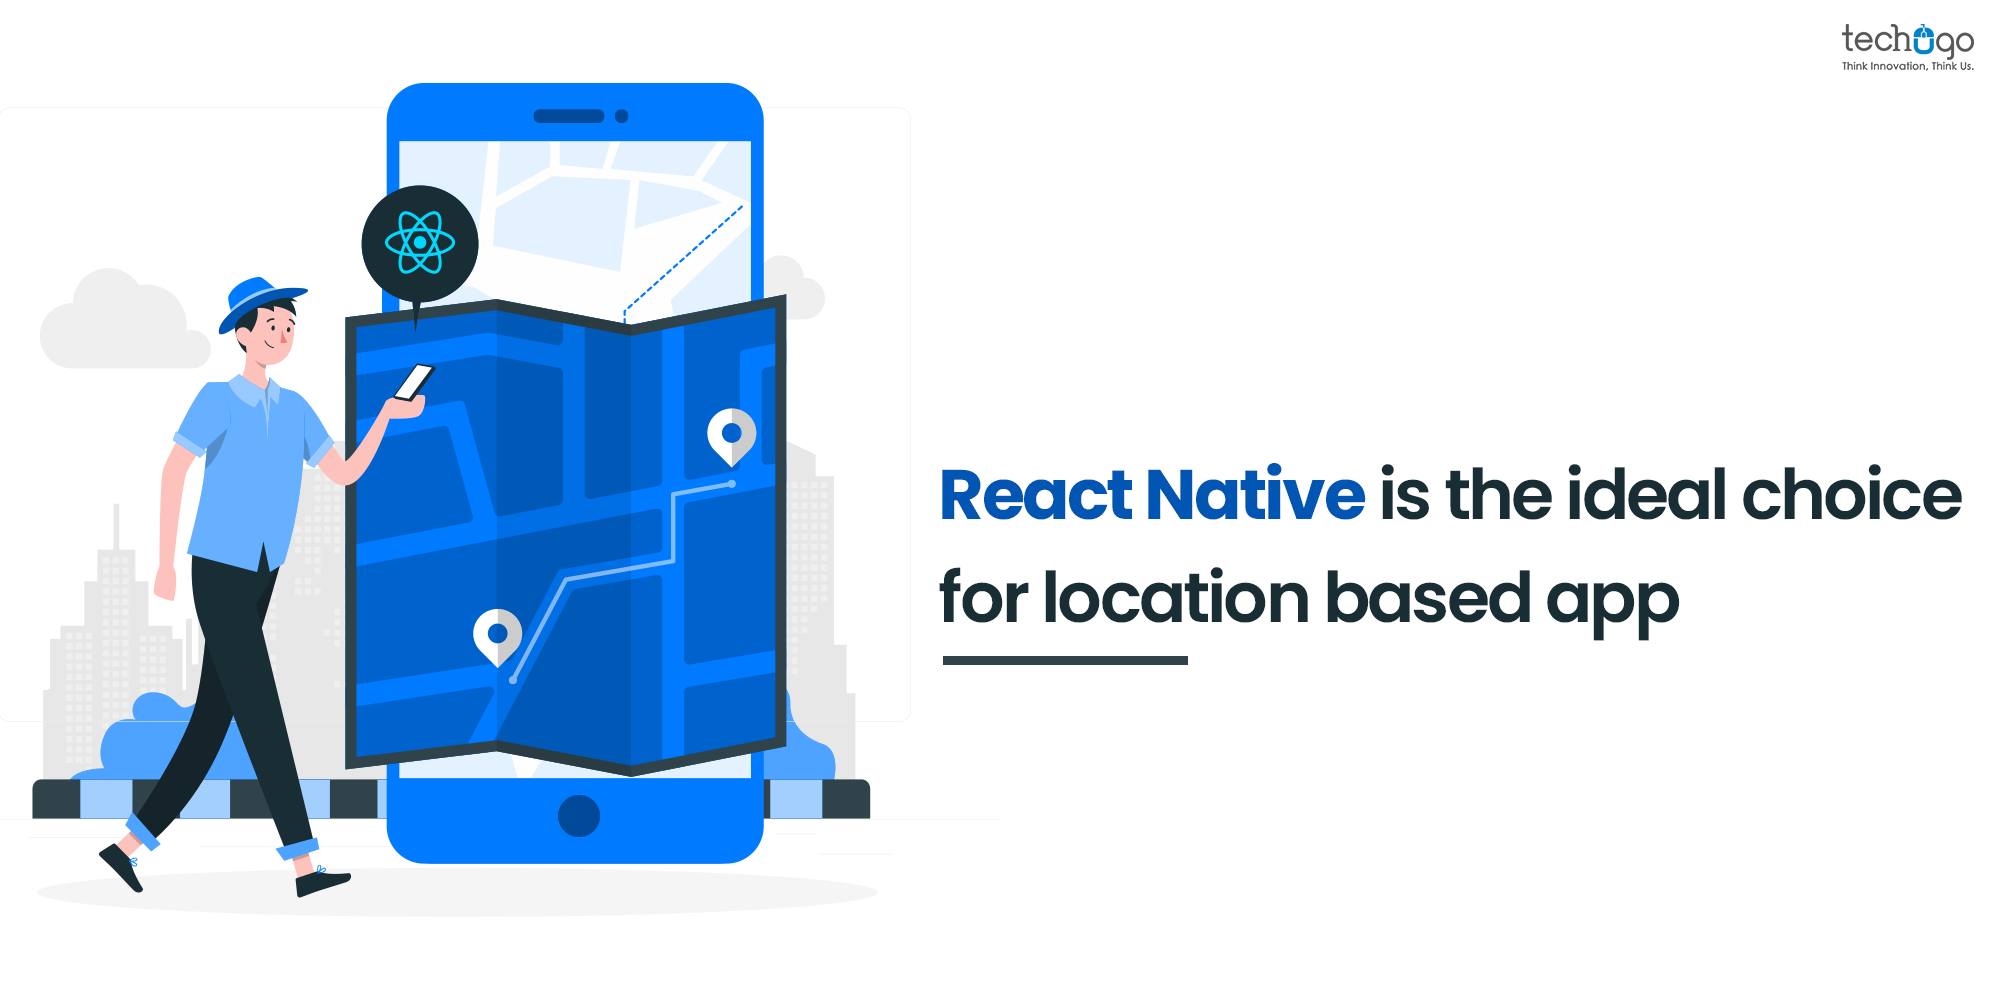 REACT NATIVE IS THE IDEAL CHOICE FOR LOCATION-BASED APP